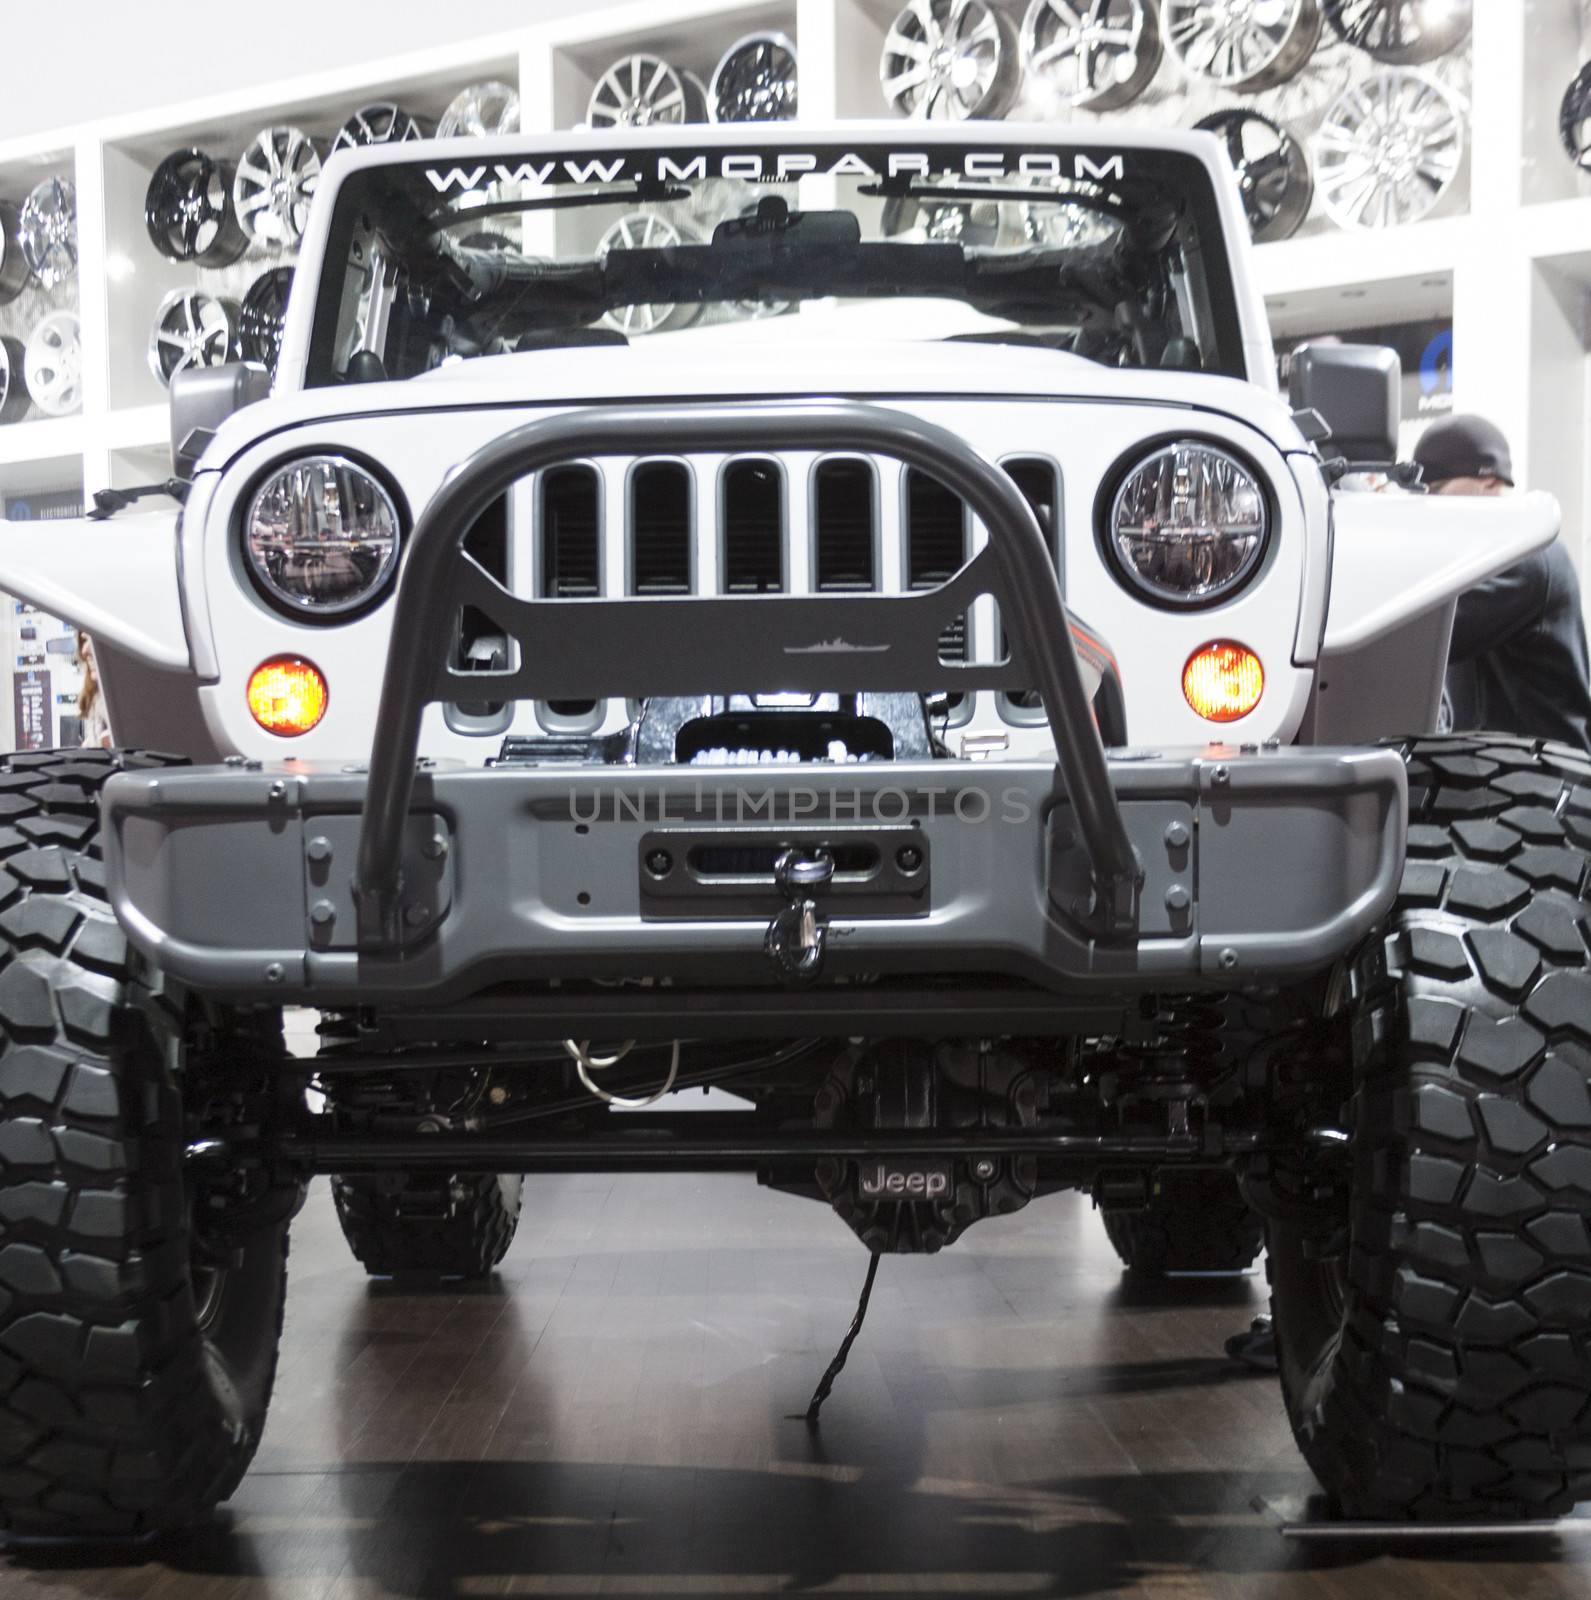 DETROIT - JANUARY 26 :The 2015 Jeep Wrangler at The North Americ by snokid